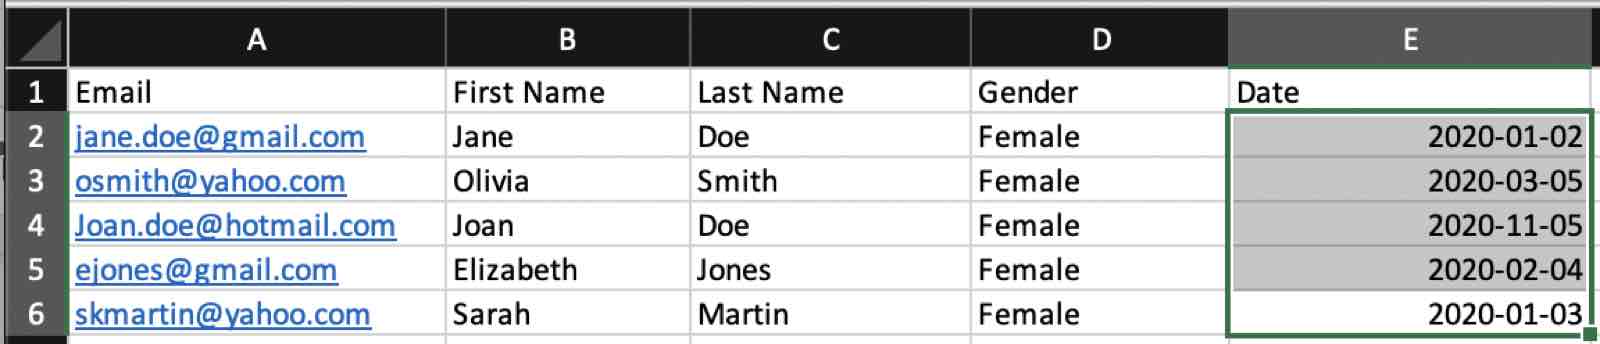 Sample data in Excel with consistent date formatting